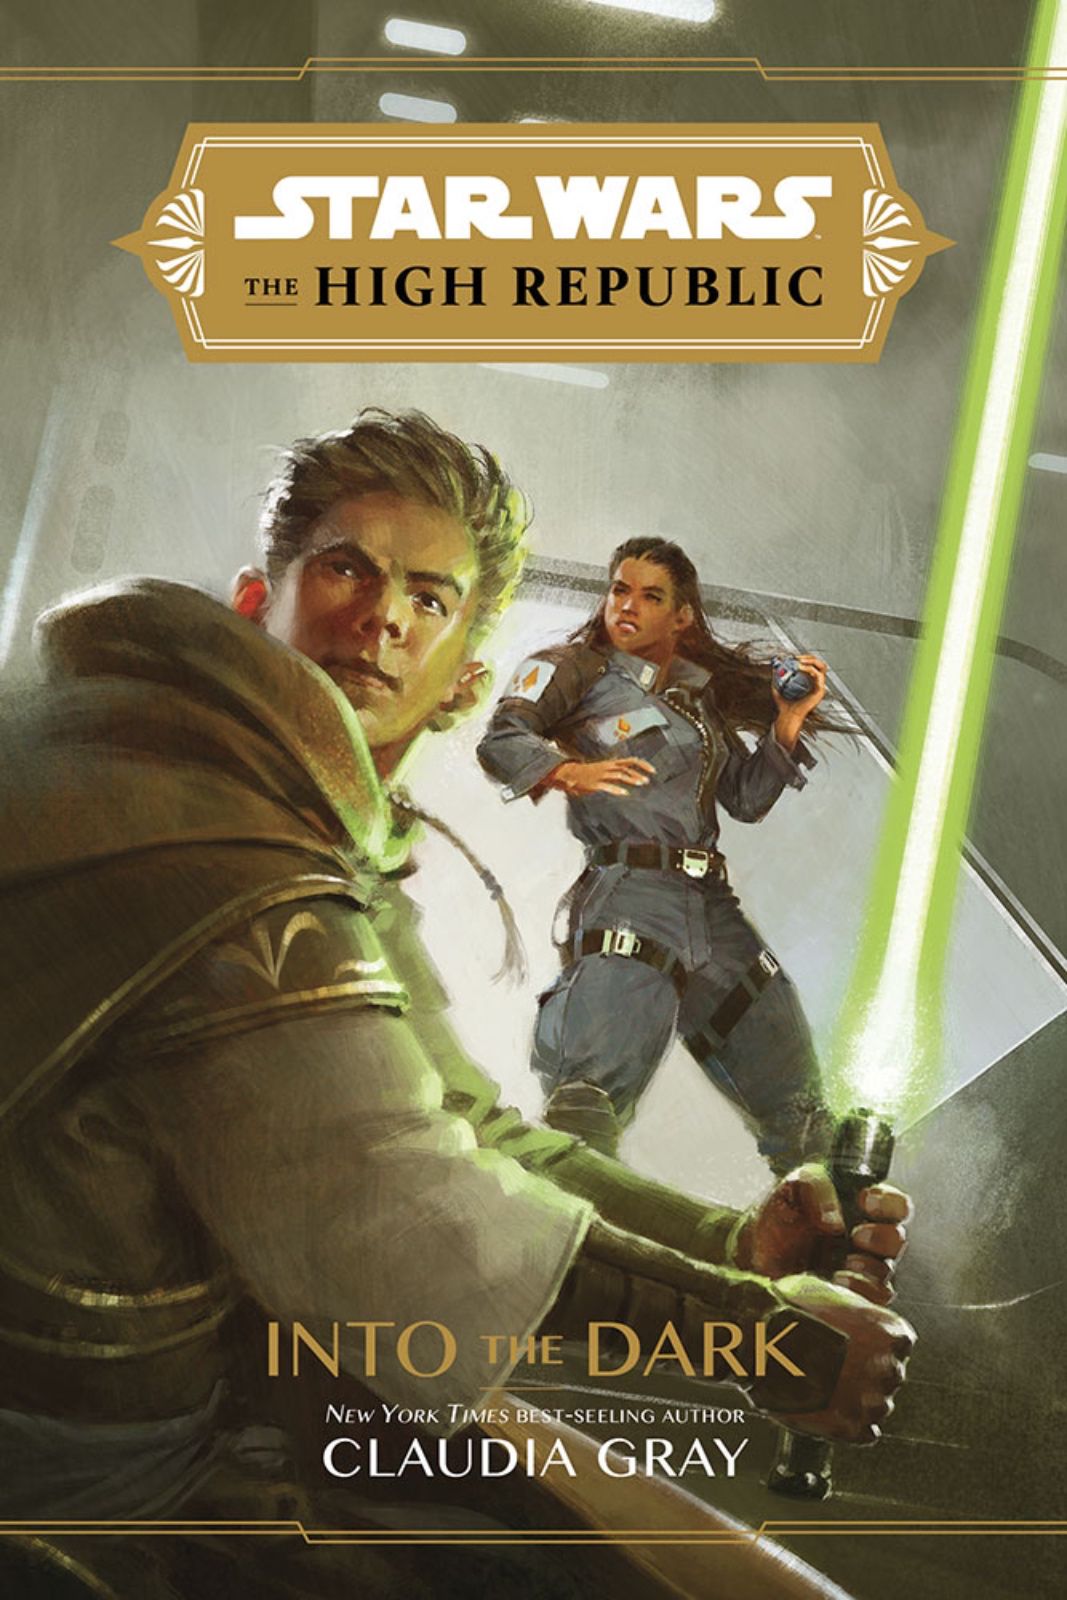 Star Wars: The High Republic Image #4